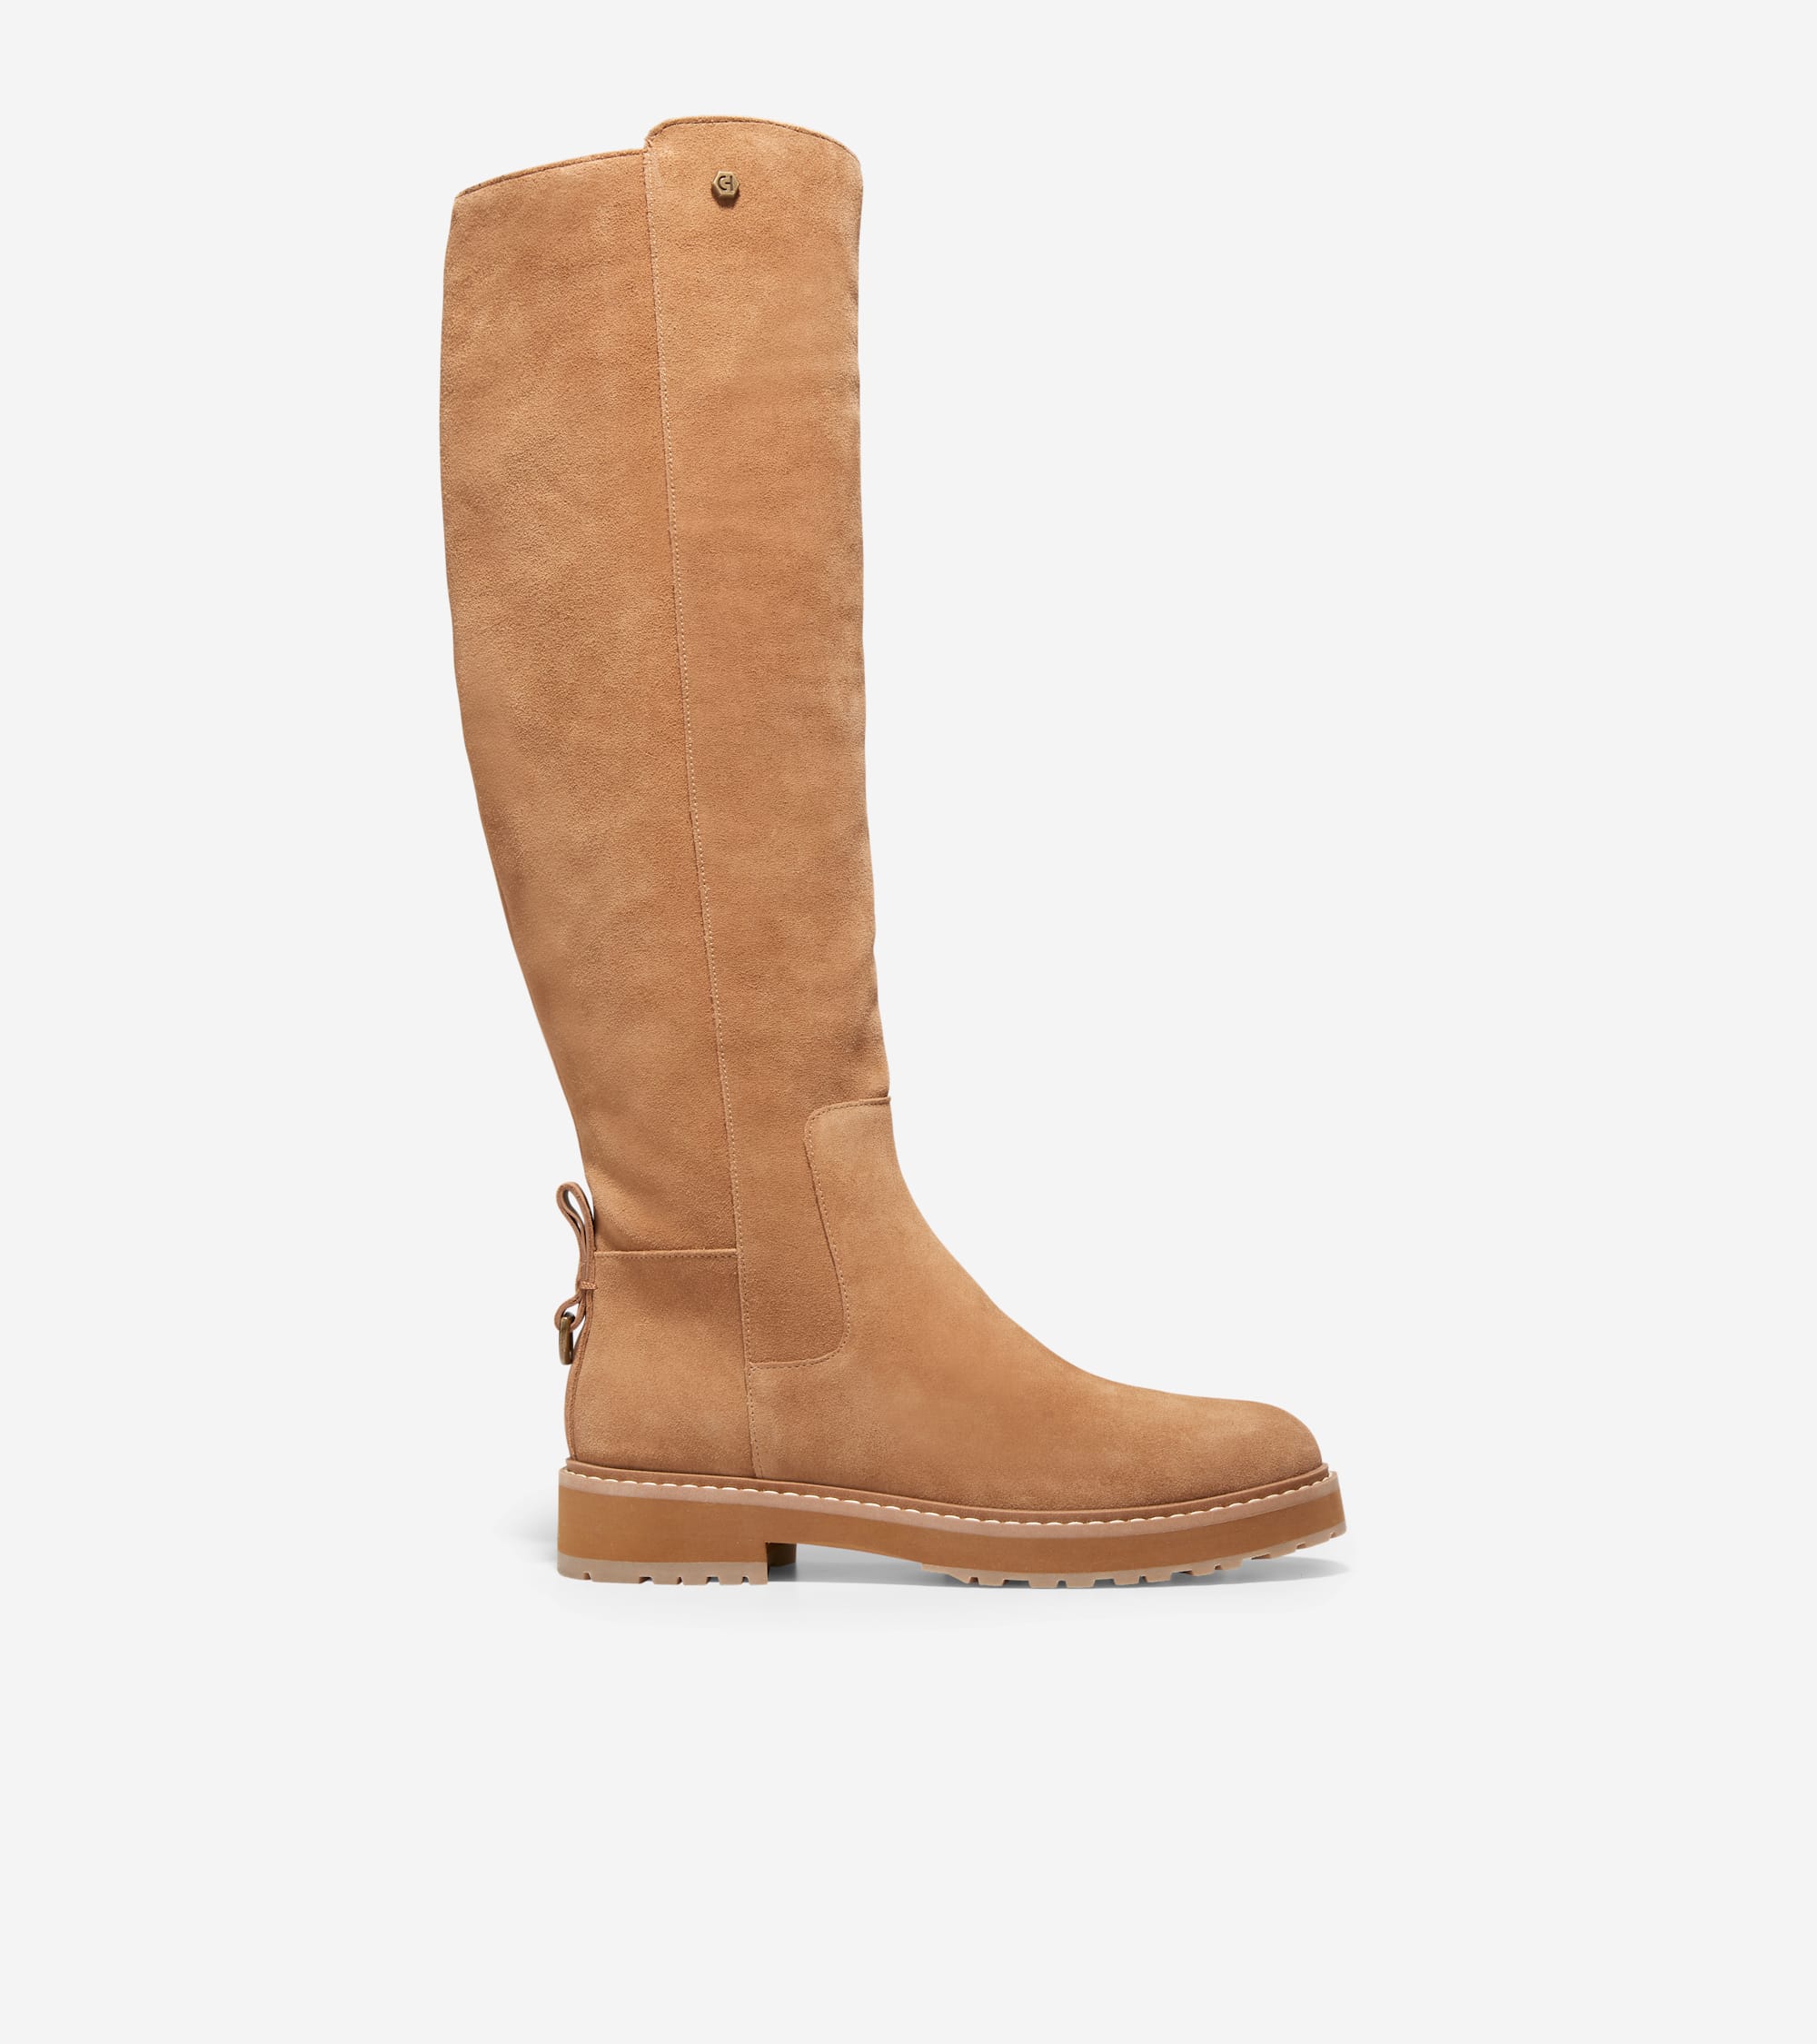 Shop the best fall and winter boots from UGG, Sorel and more